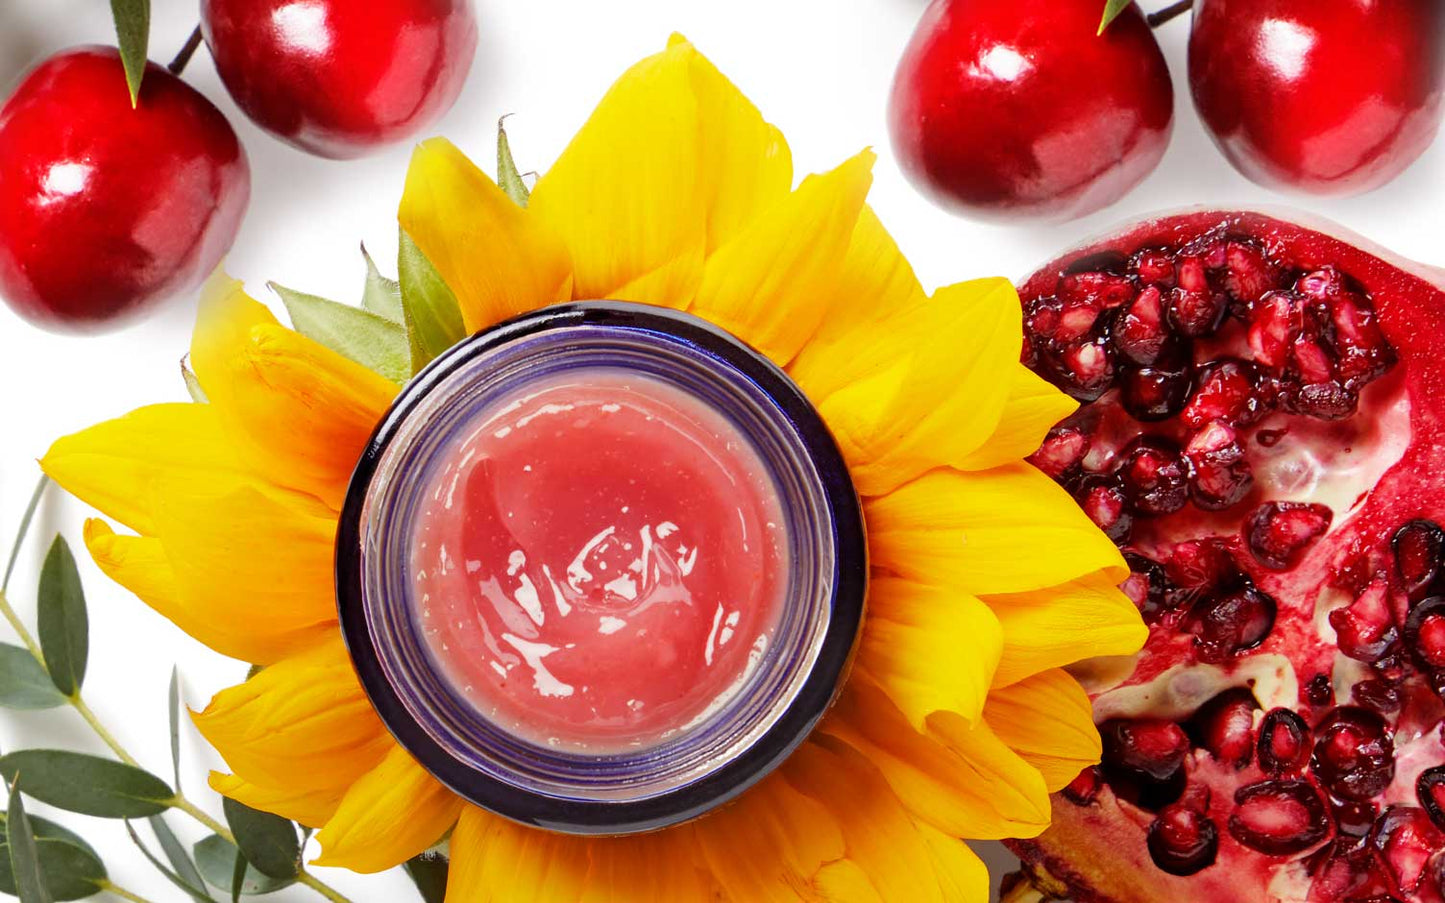 Sweet Cherry Conditioning Lip Butter